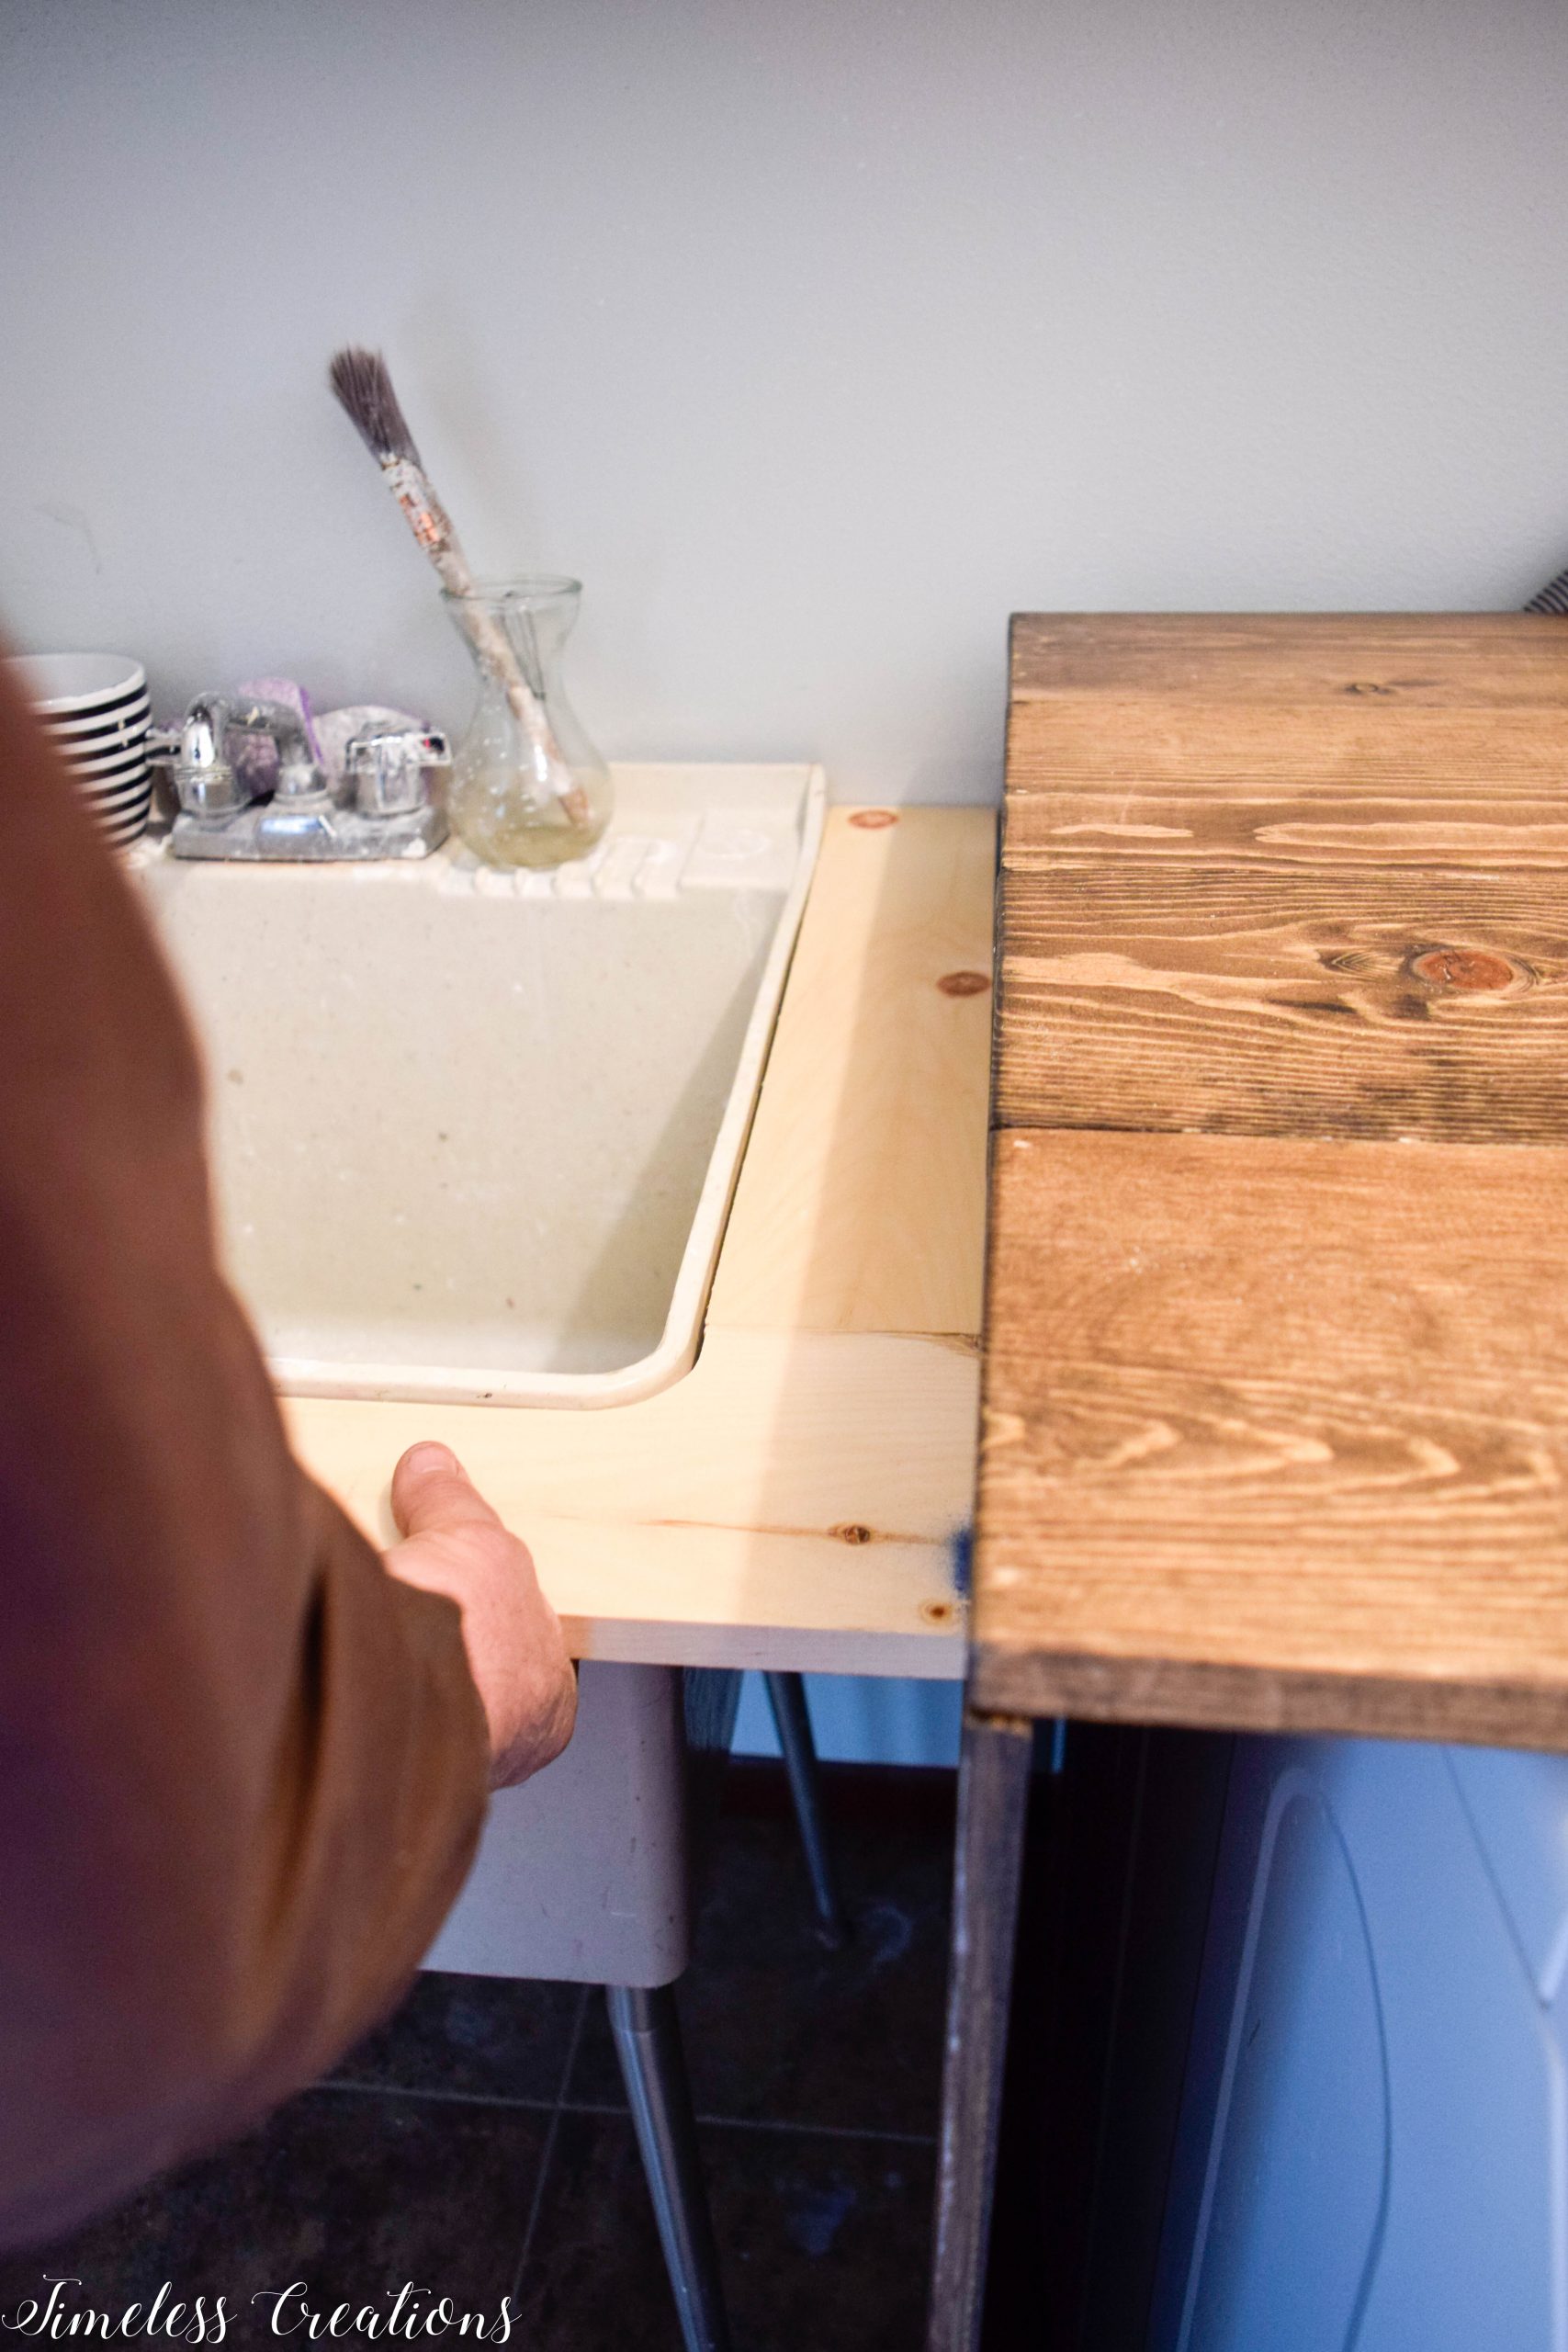 How to Hide Your Utility Sink: Faux Cabinet Tutorial - Within the